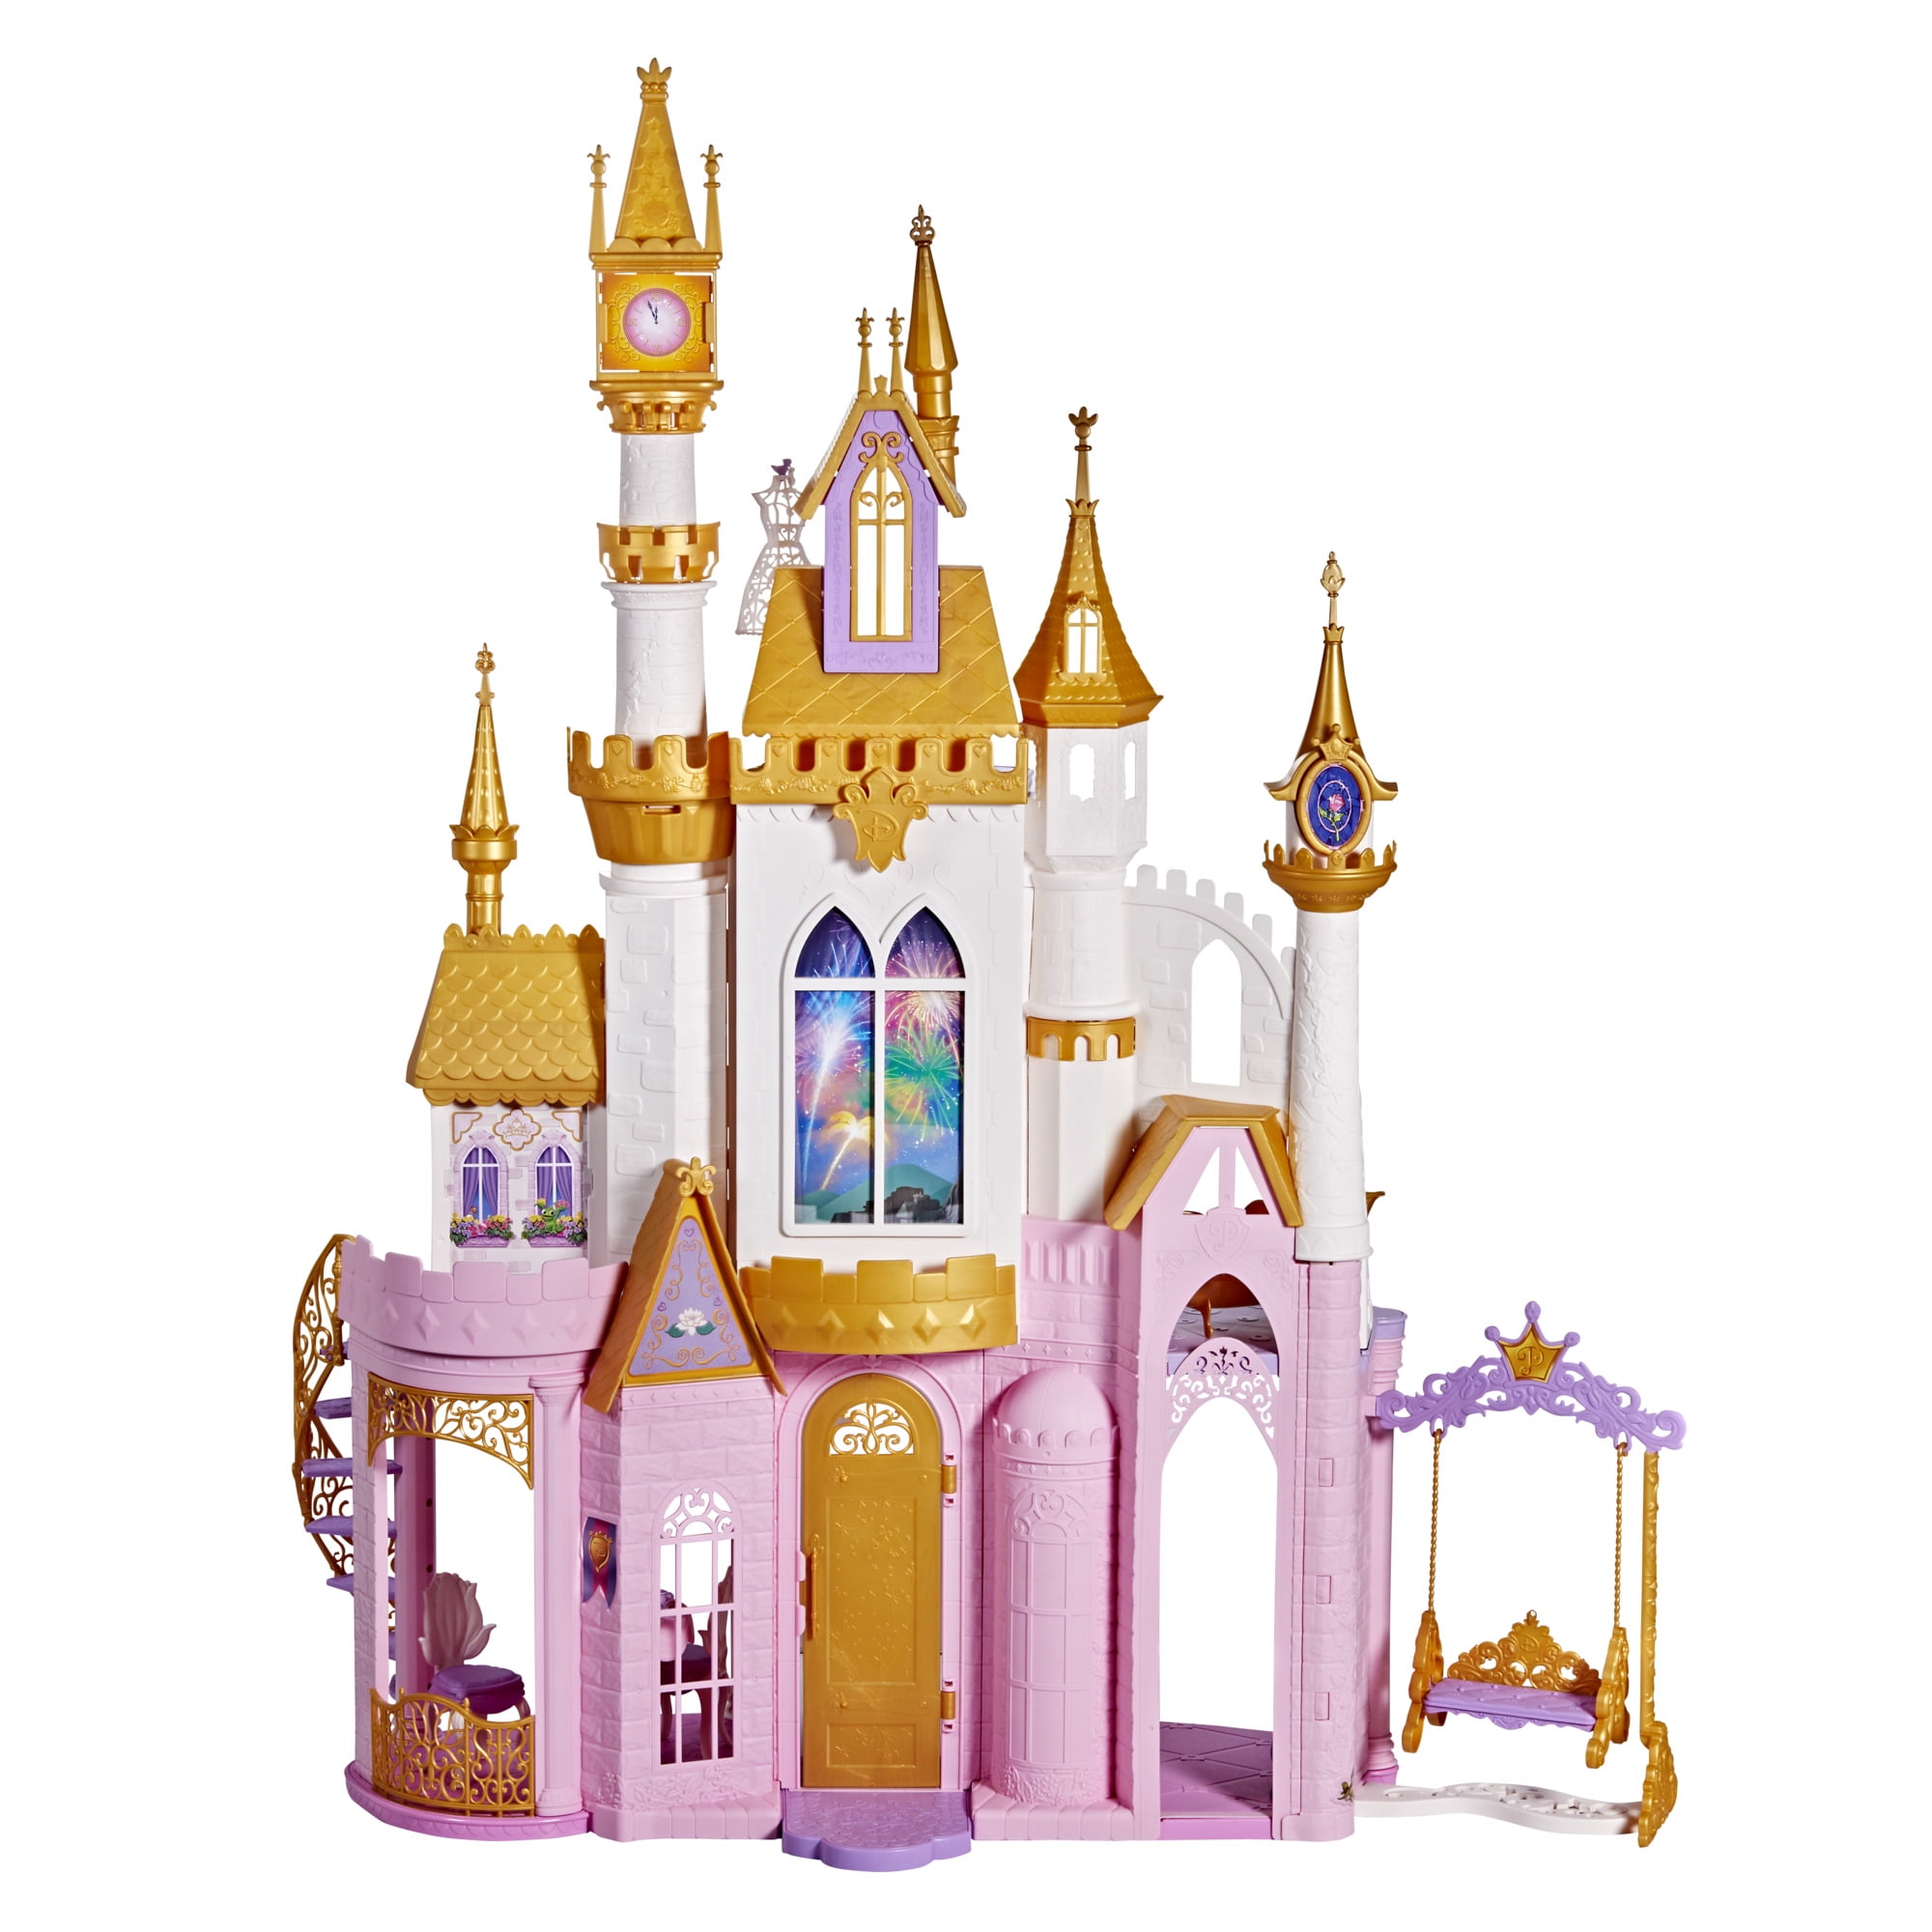 Princess New  Castle Play Set pight Ideal Girls Gift Toy 2973 